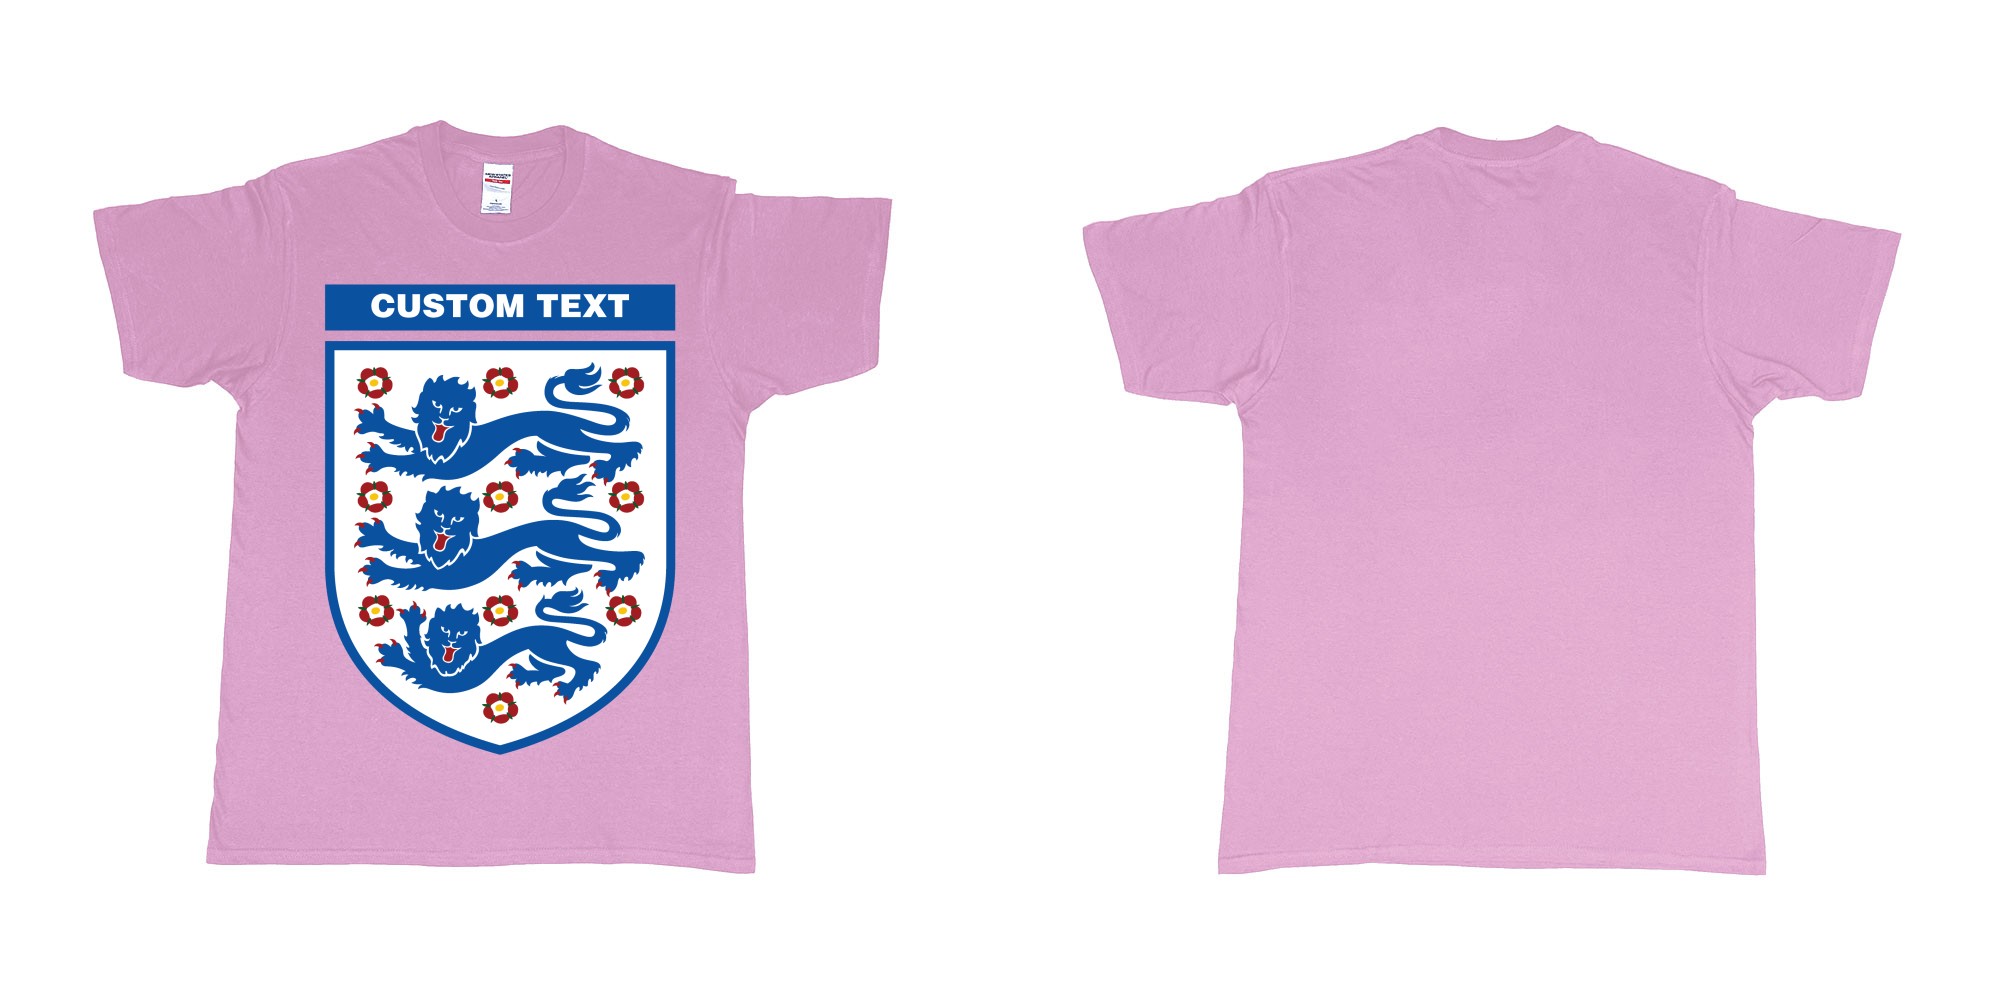 Custom tshirt design england national football team logo in fabric color light-pink choice your own text made in Bali by The Pirate Way